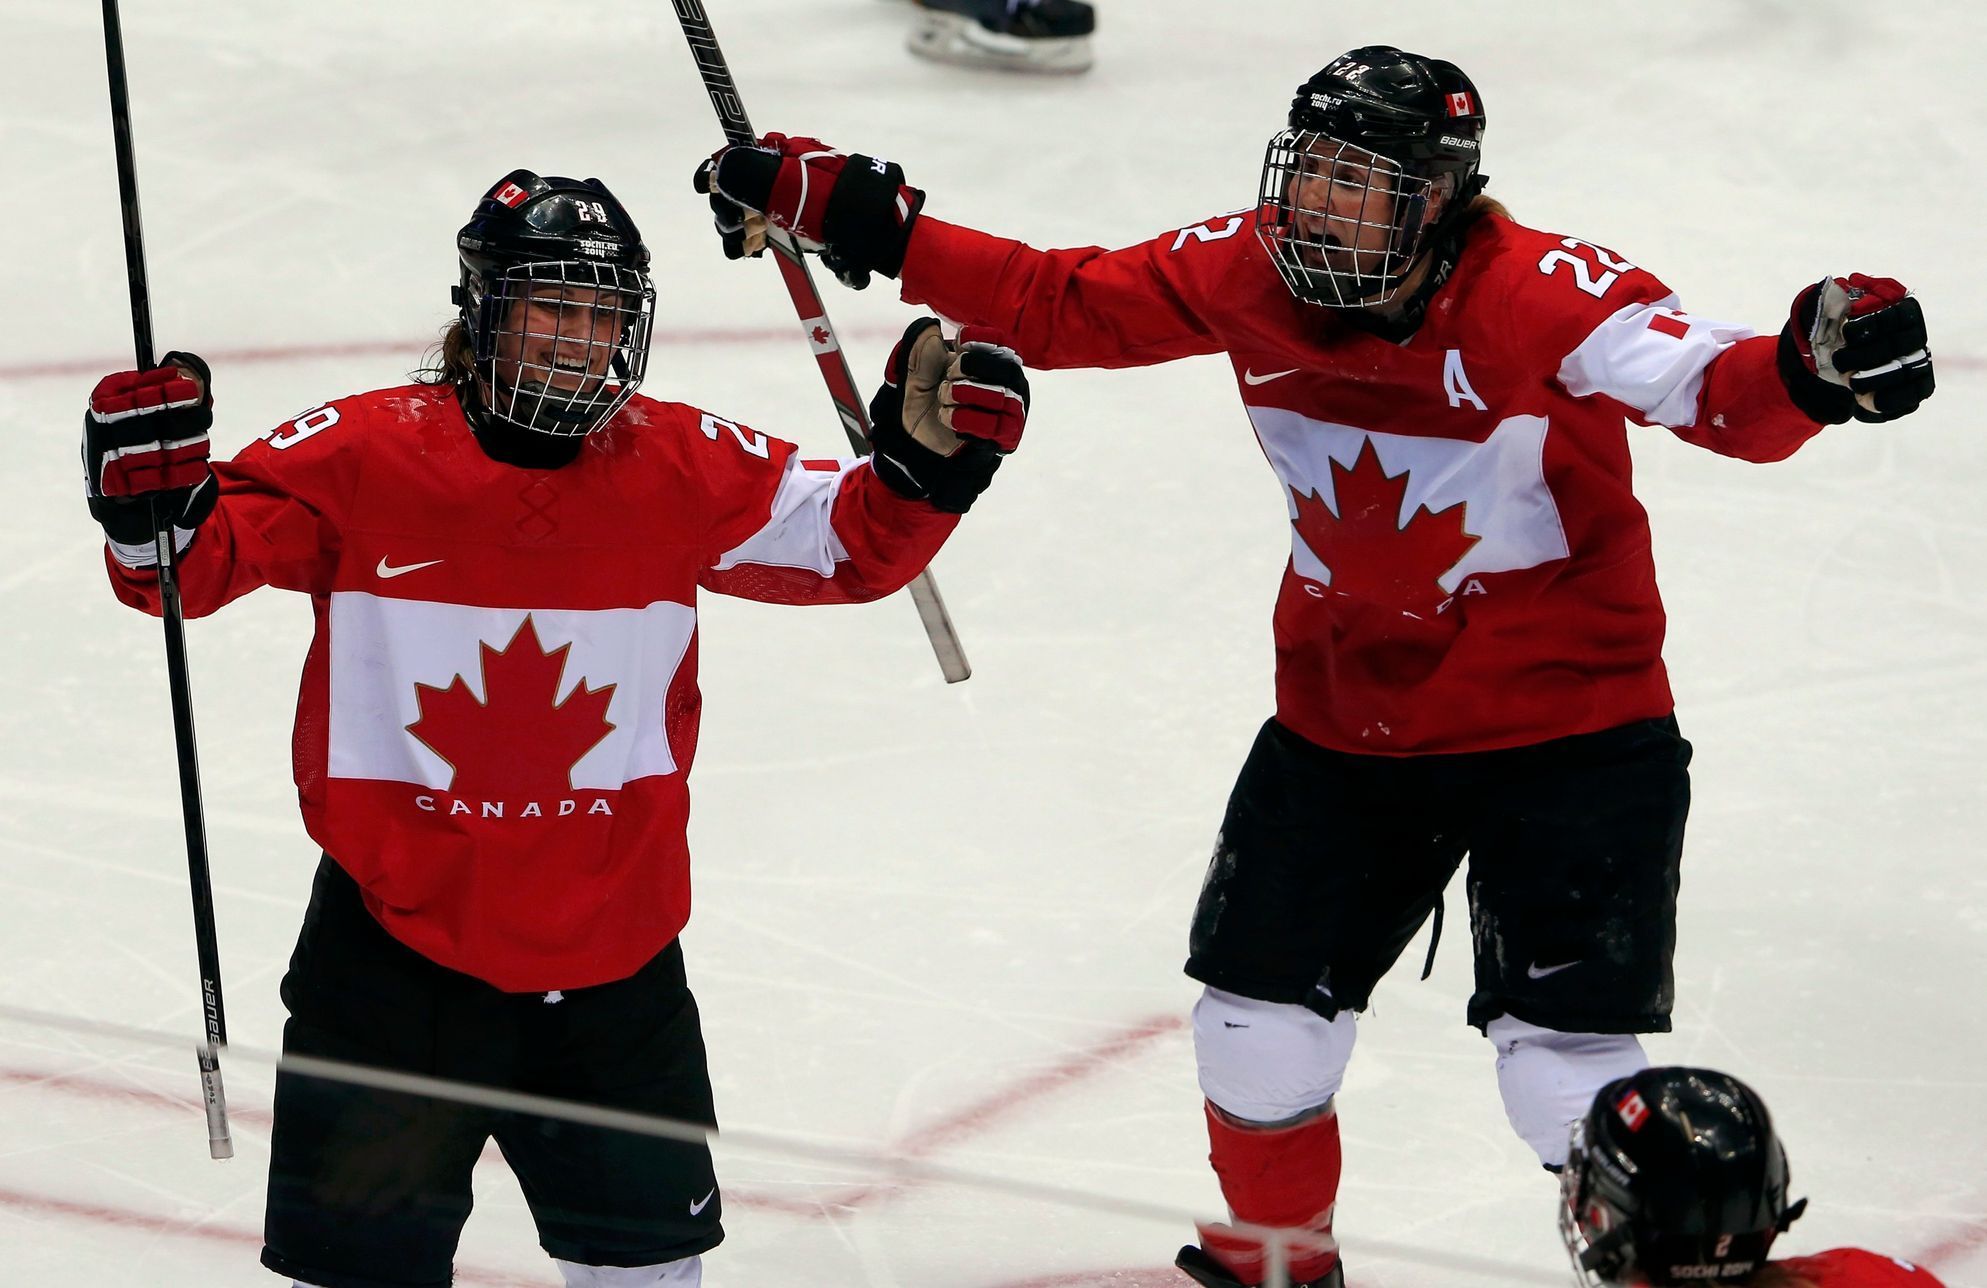 Canada's Poulin celebrates her gold medal-winning overtime goal against Team USA with teammate Wickenheiser at the Sochi 2014 Winter Olympic Games